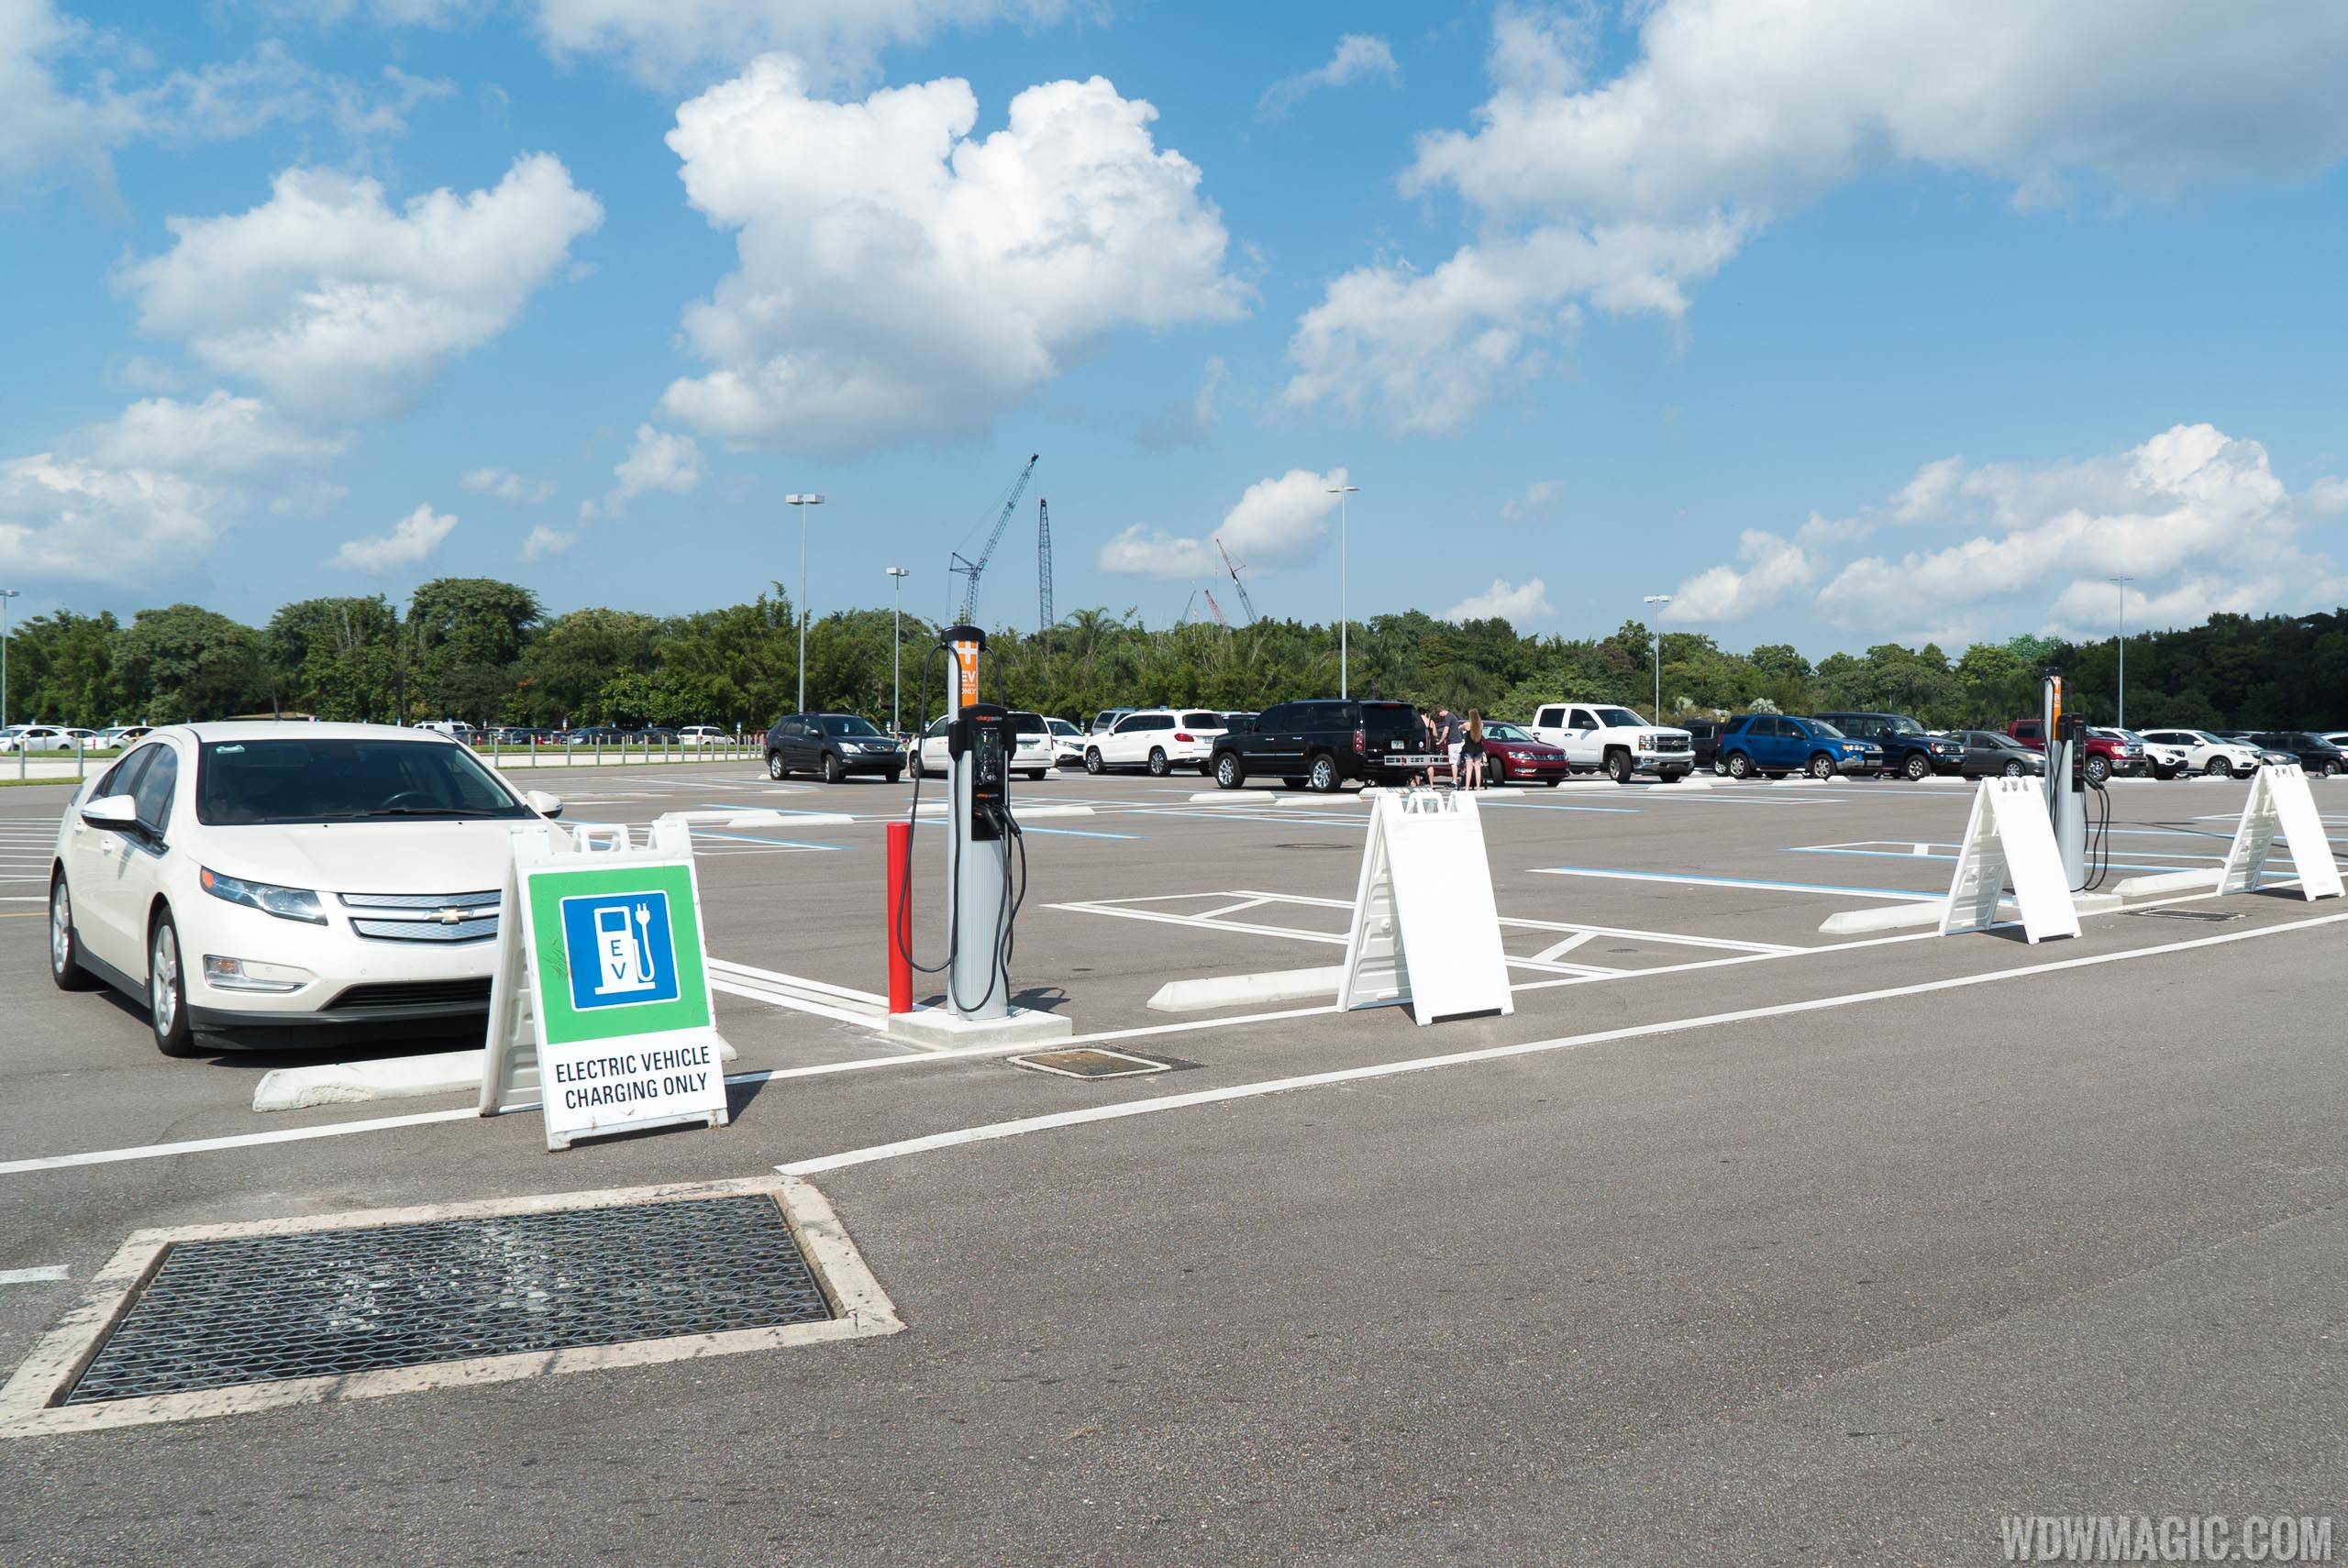 PHOTOS - Electric Vehicle charging now available at Disney's Animal Kingdom